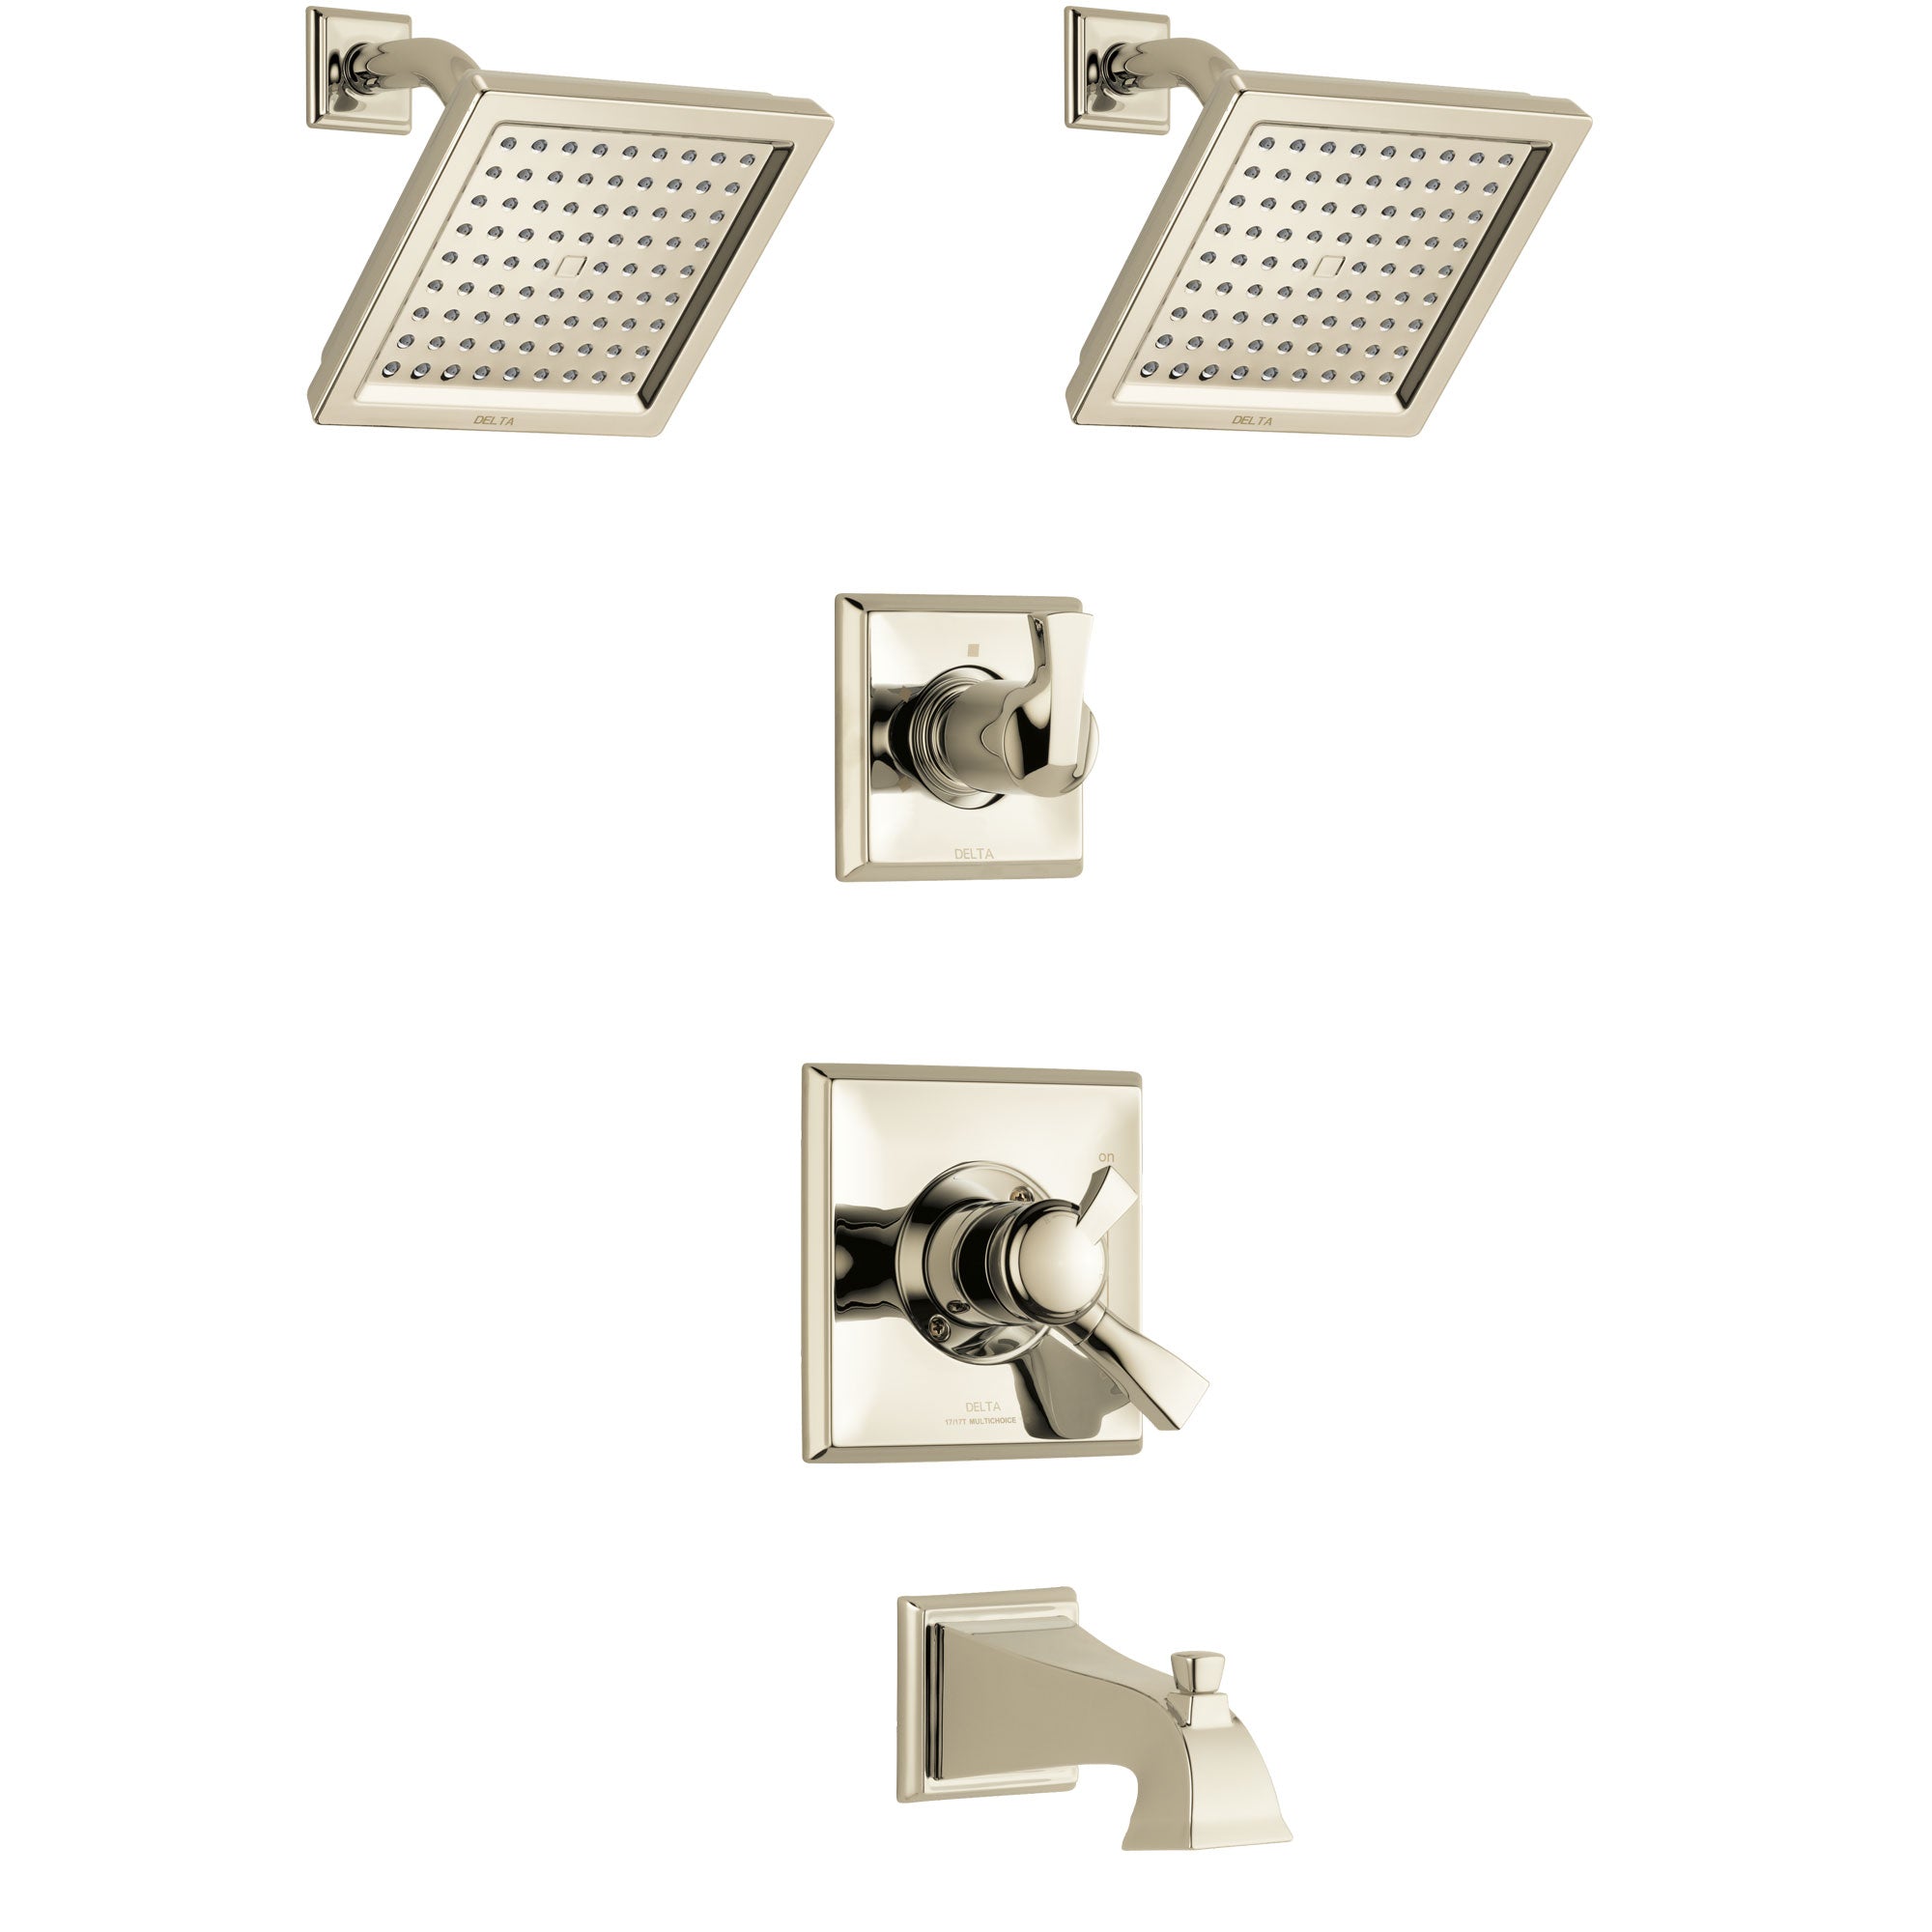 Delta Dryden Polished Nickel Finish Tub and Shower System with Dual Control Handle, 3-Setting Diverter, 2 Showerheads SS17451PN4